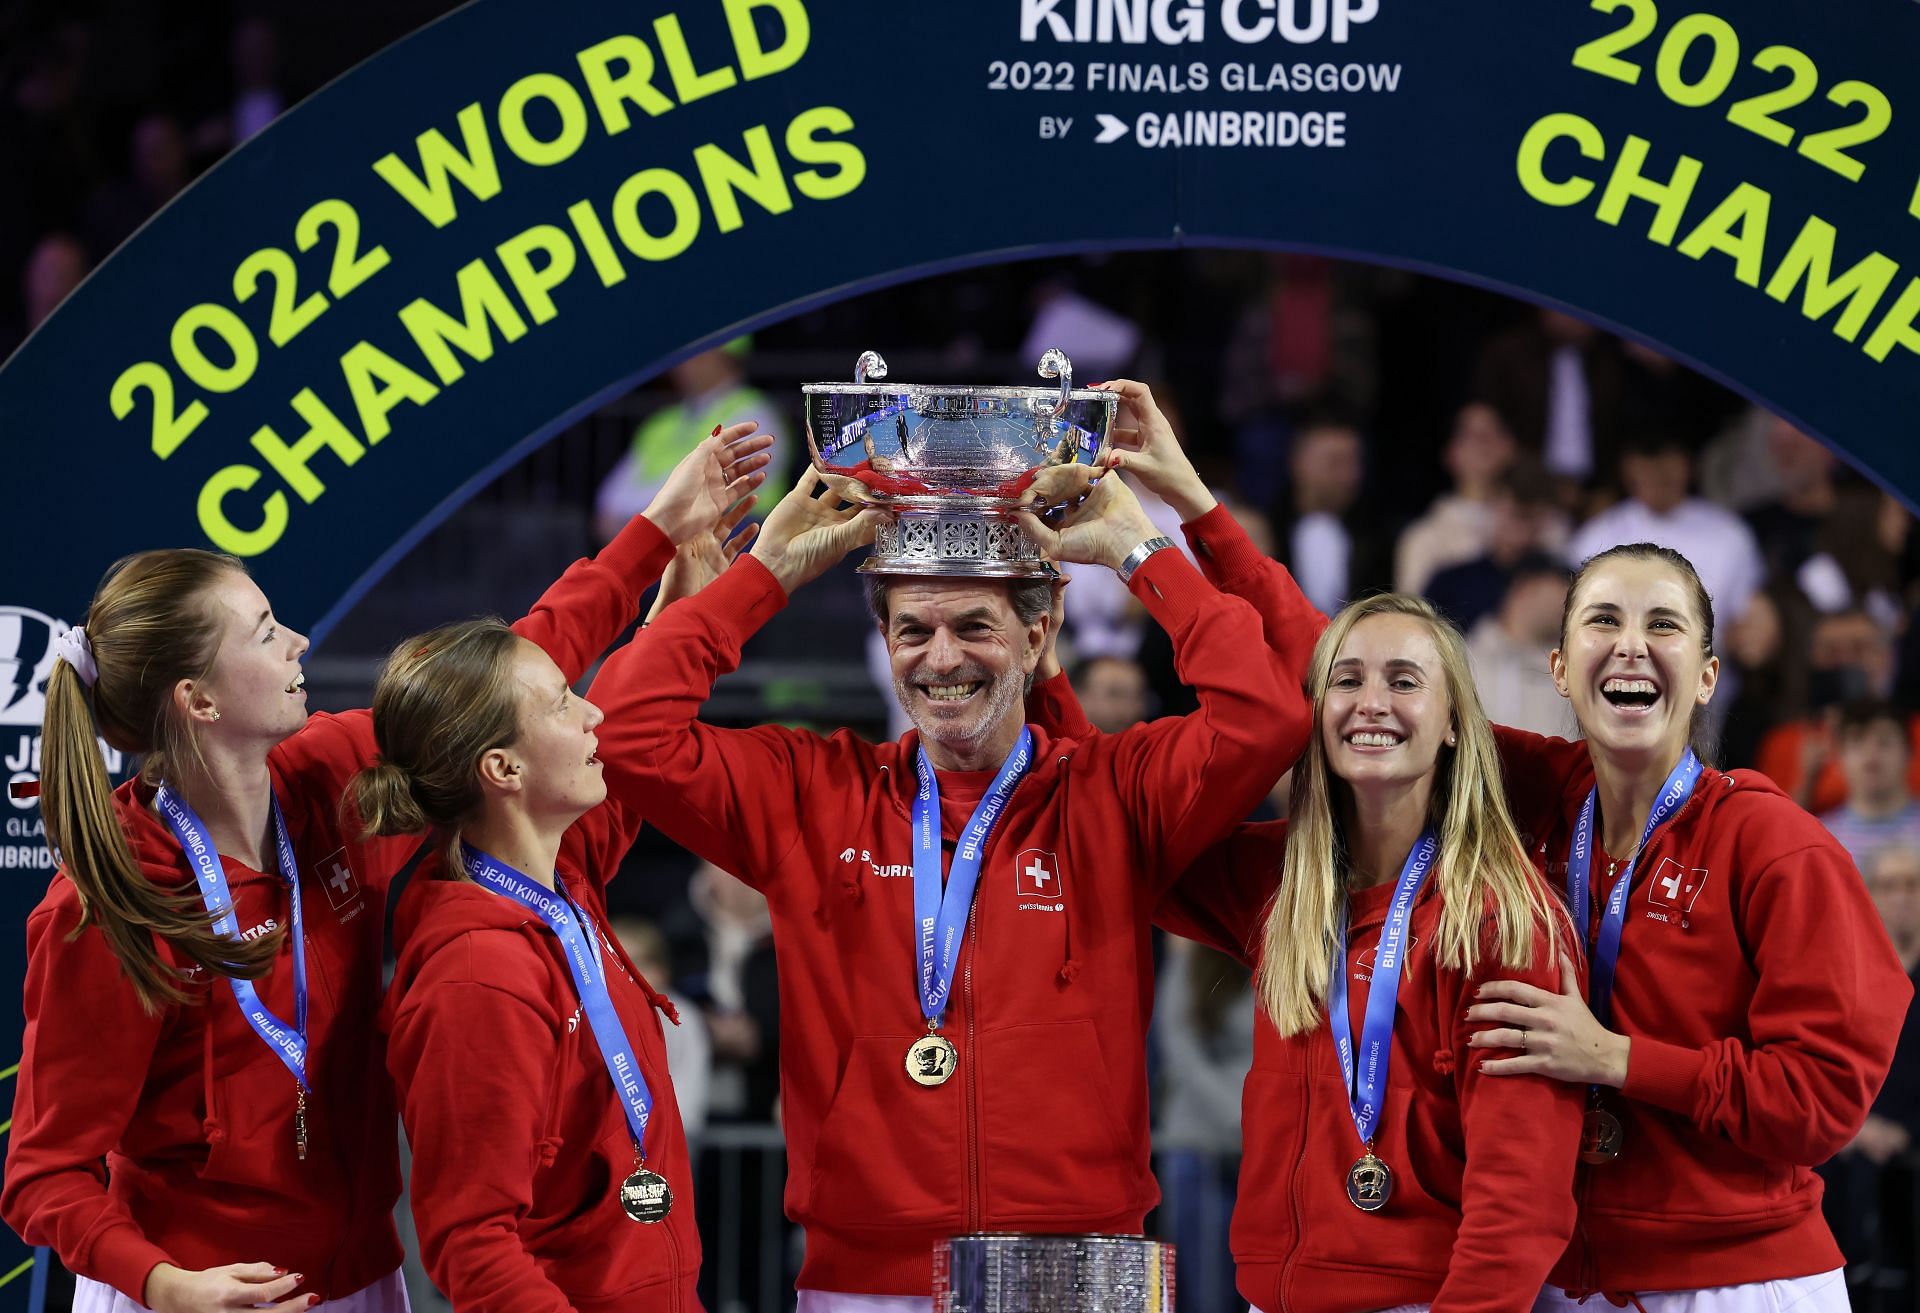 The Swiss team with the 2022 Billie Jean King Cup Finals trophy.